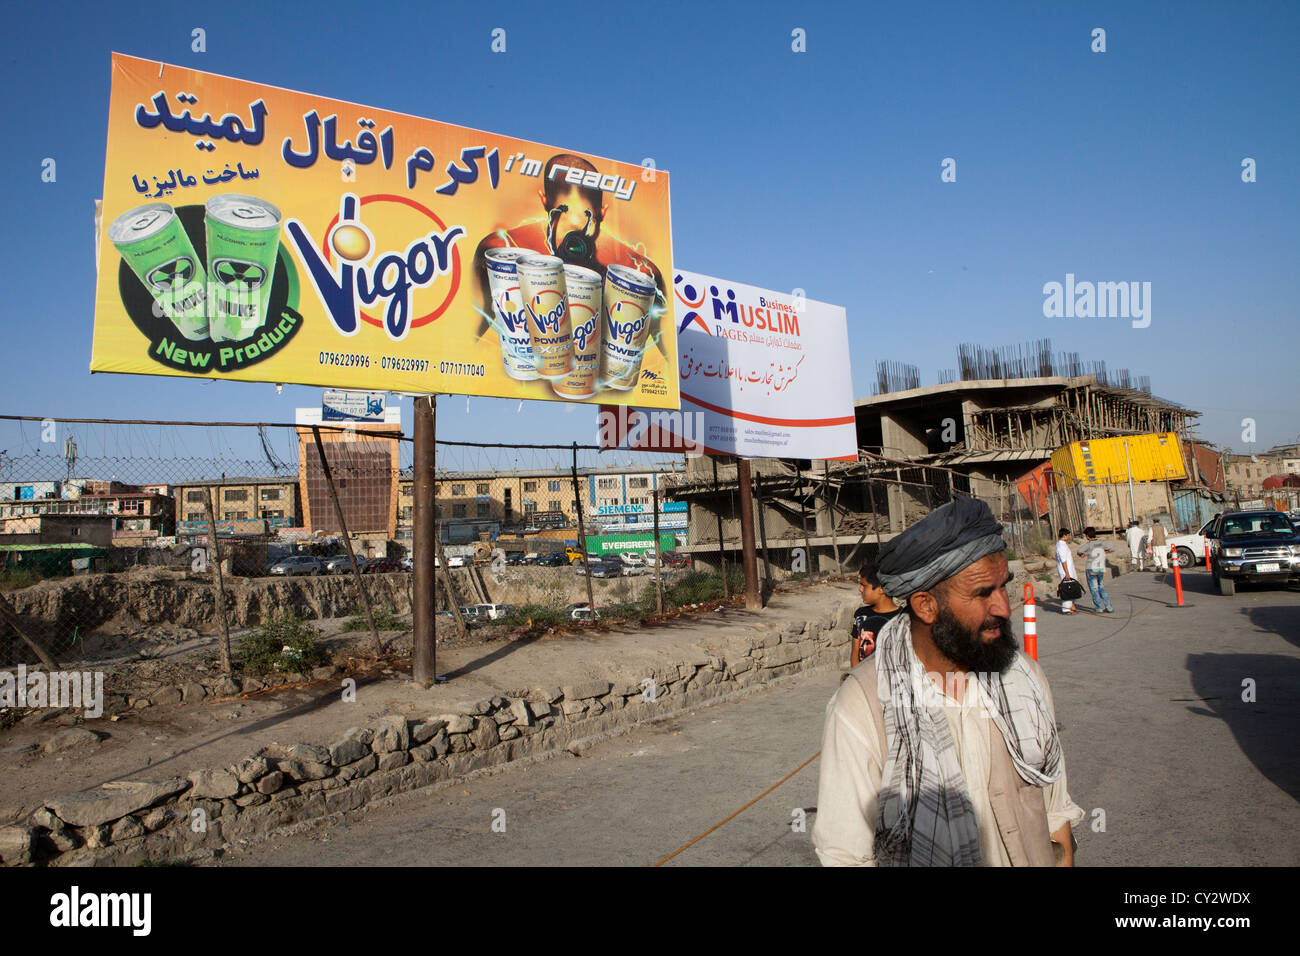 advertisement of energy drink in kabul, Afghanistan Stock Photo